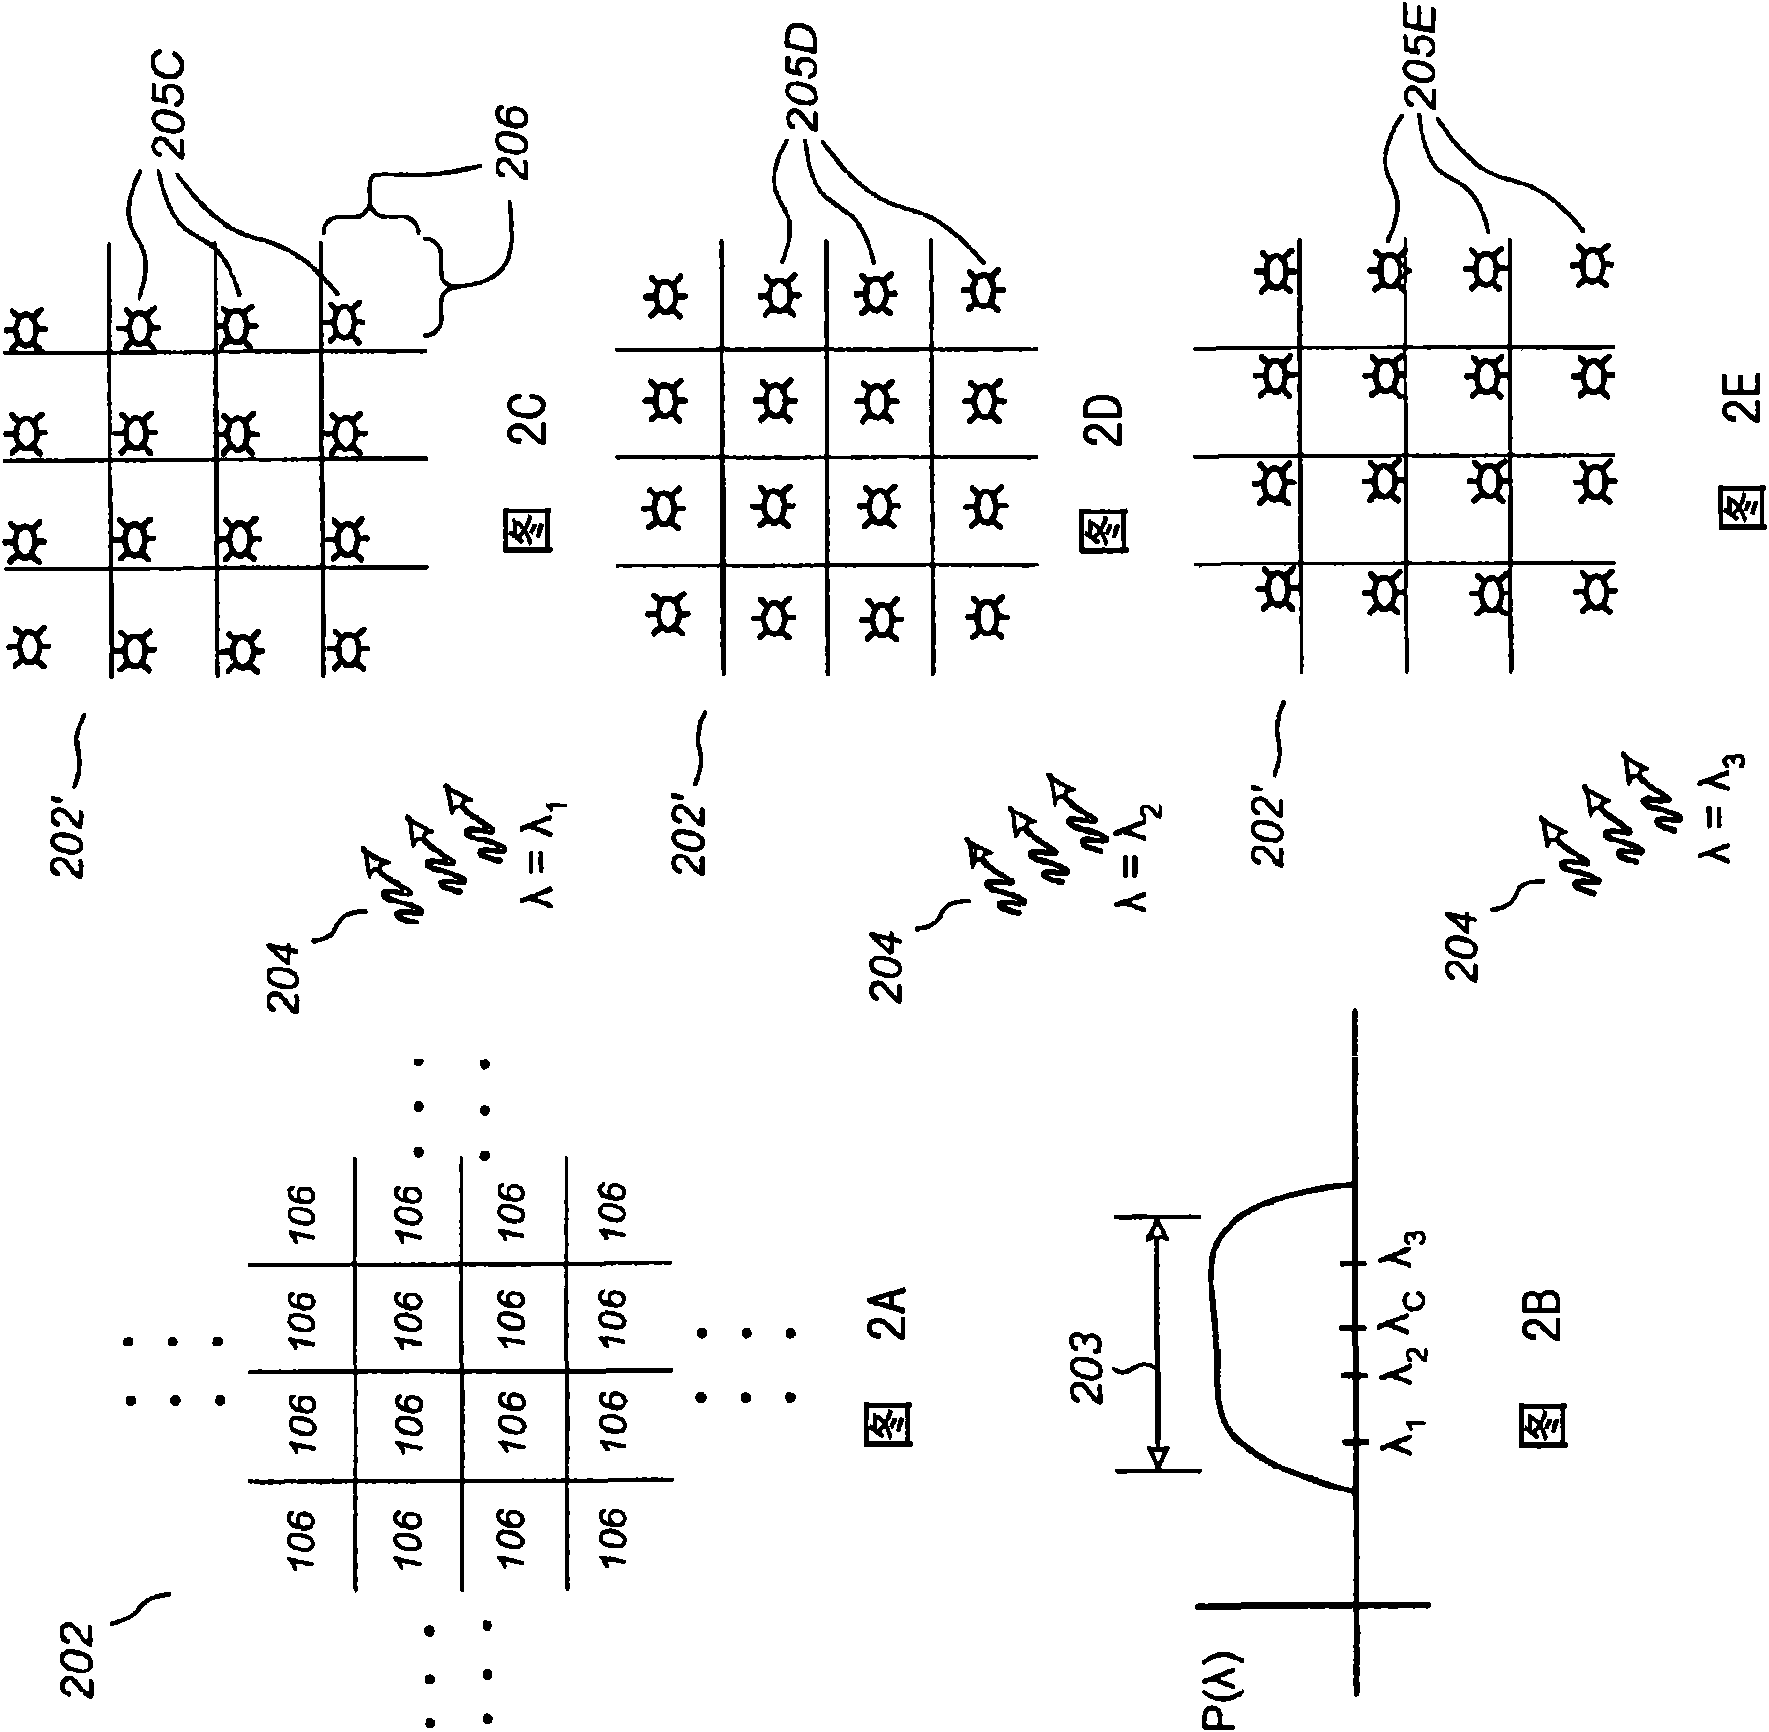 Composite material with chirped resonant cells